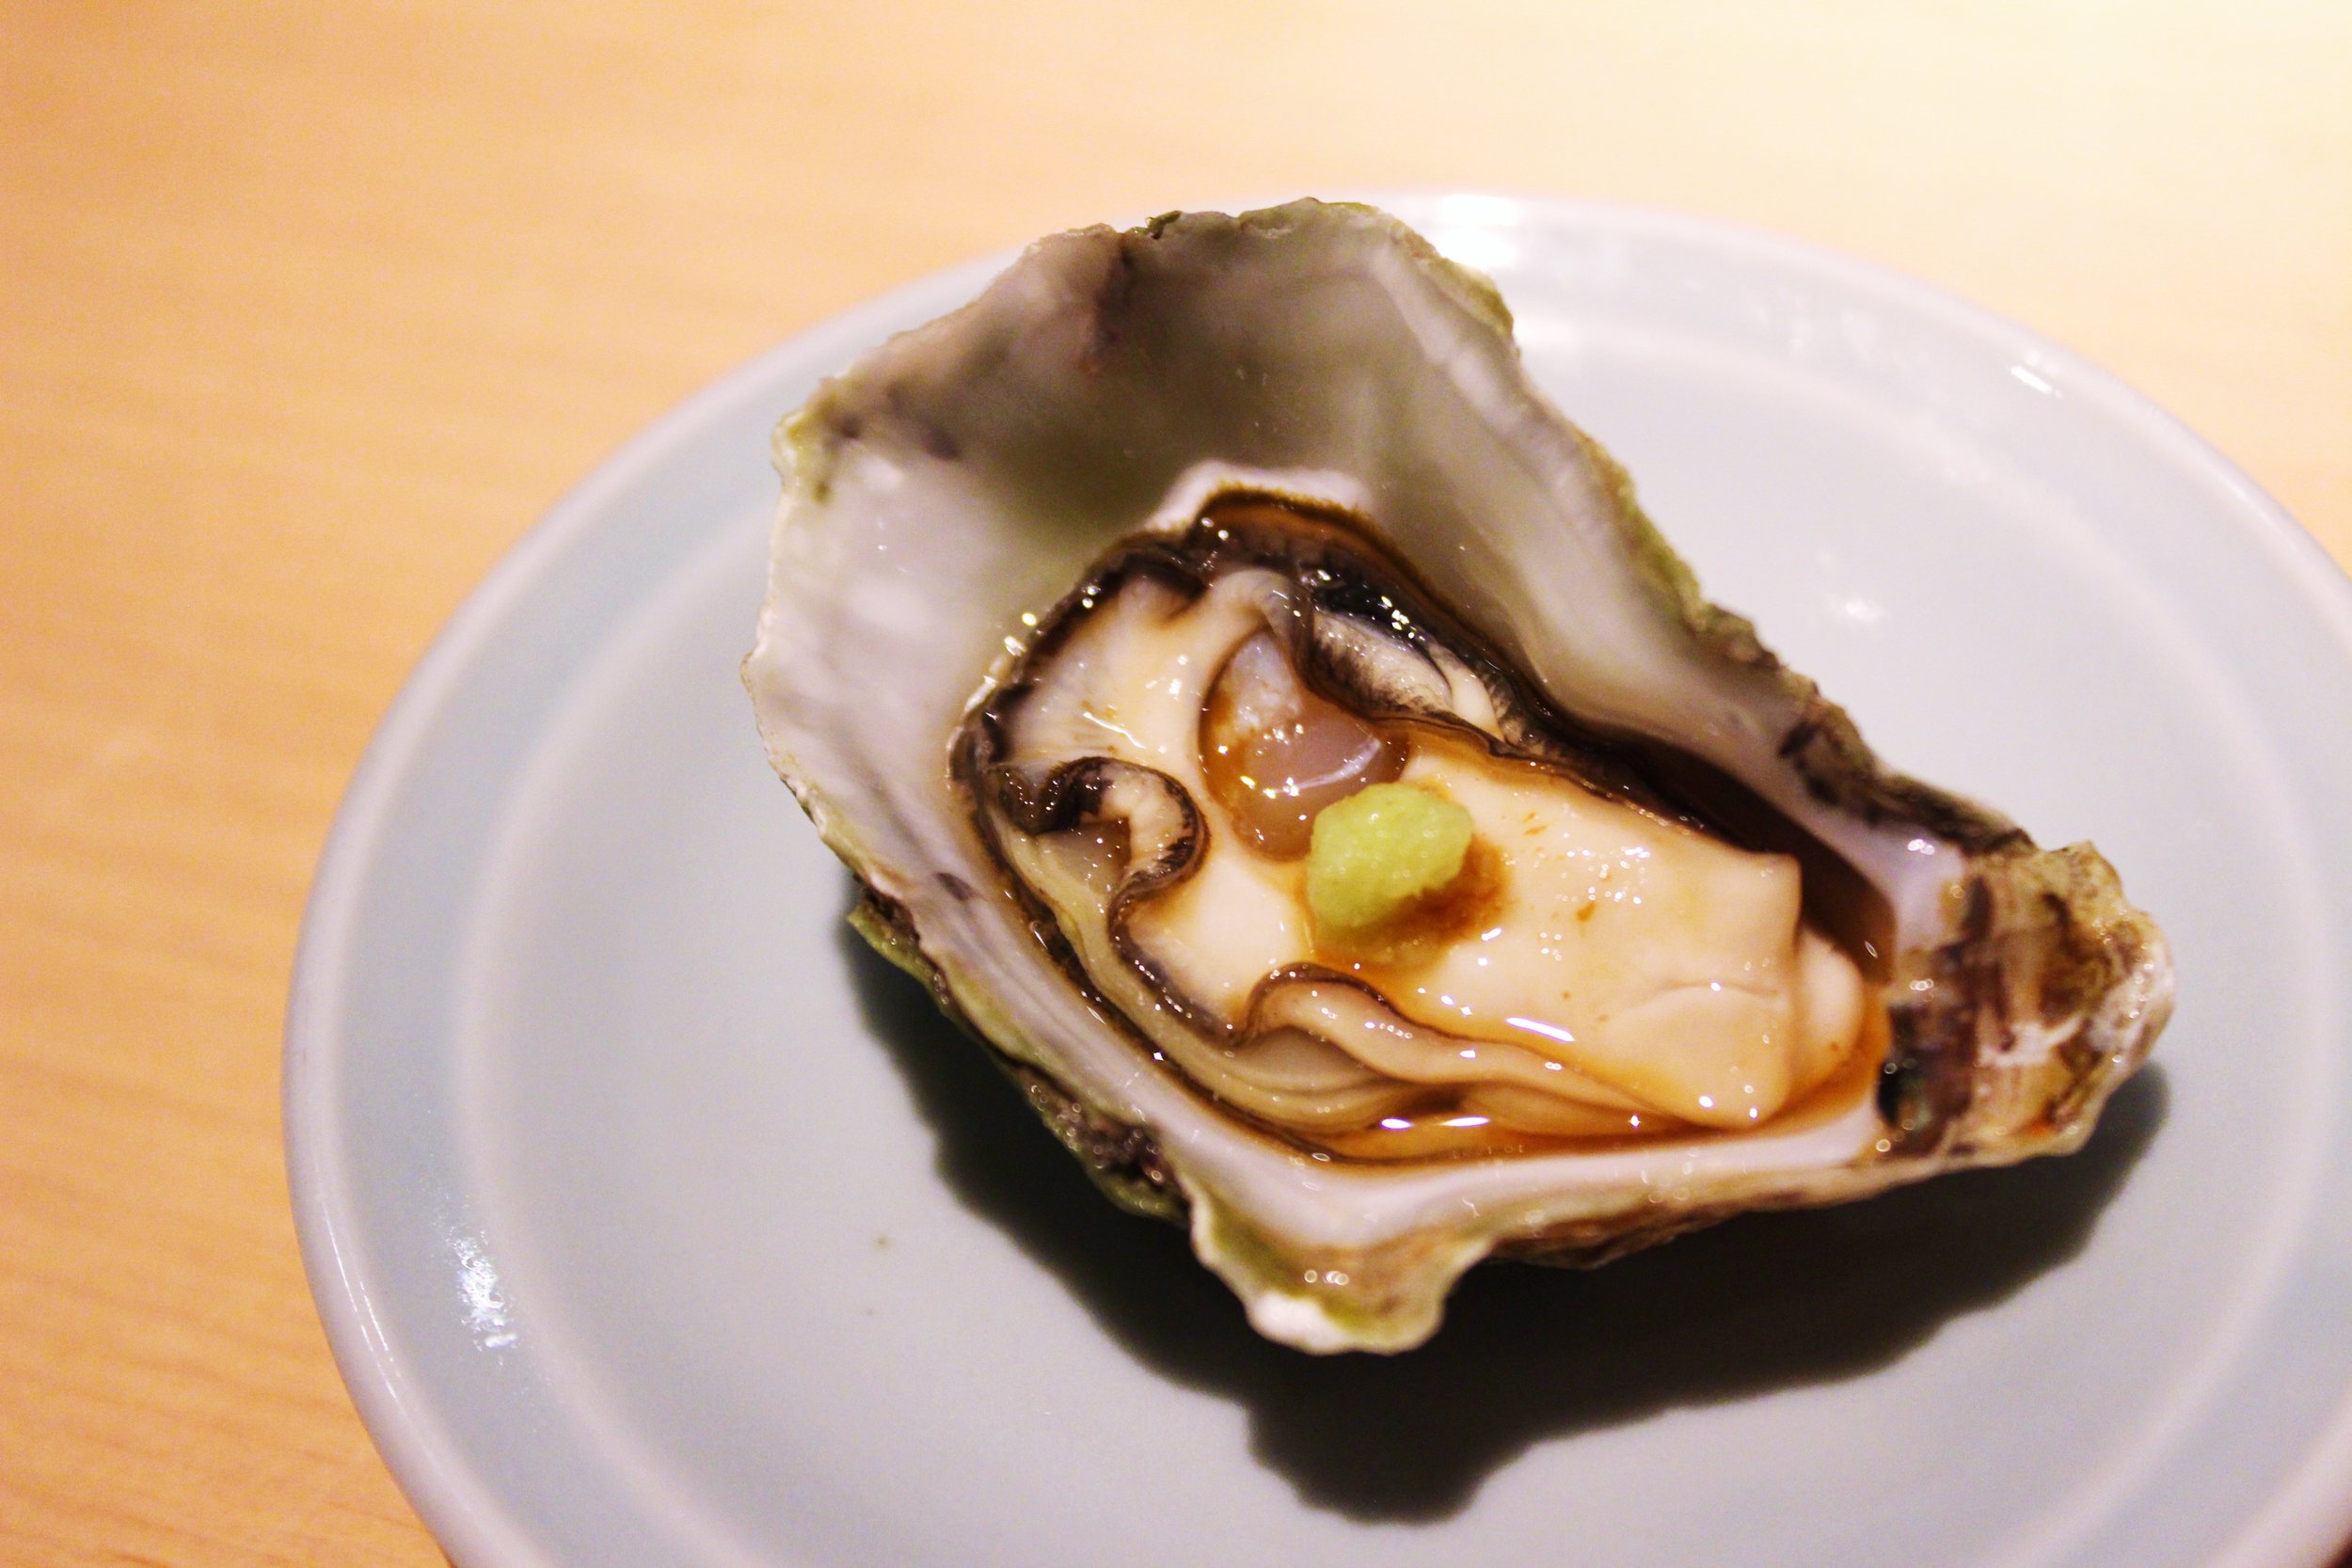 Kumamoto Oyster from California with Fresh Citrus and Wasabi